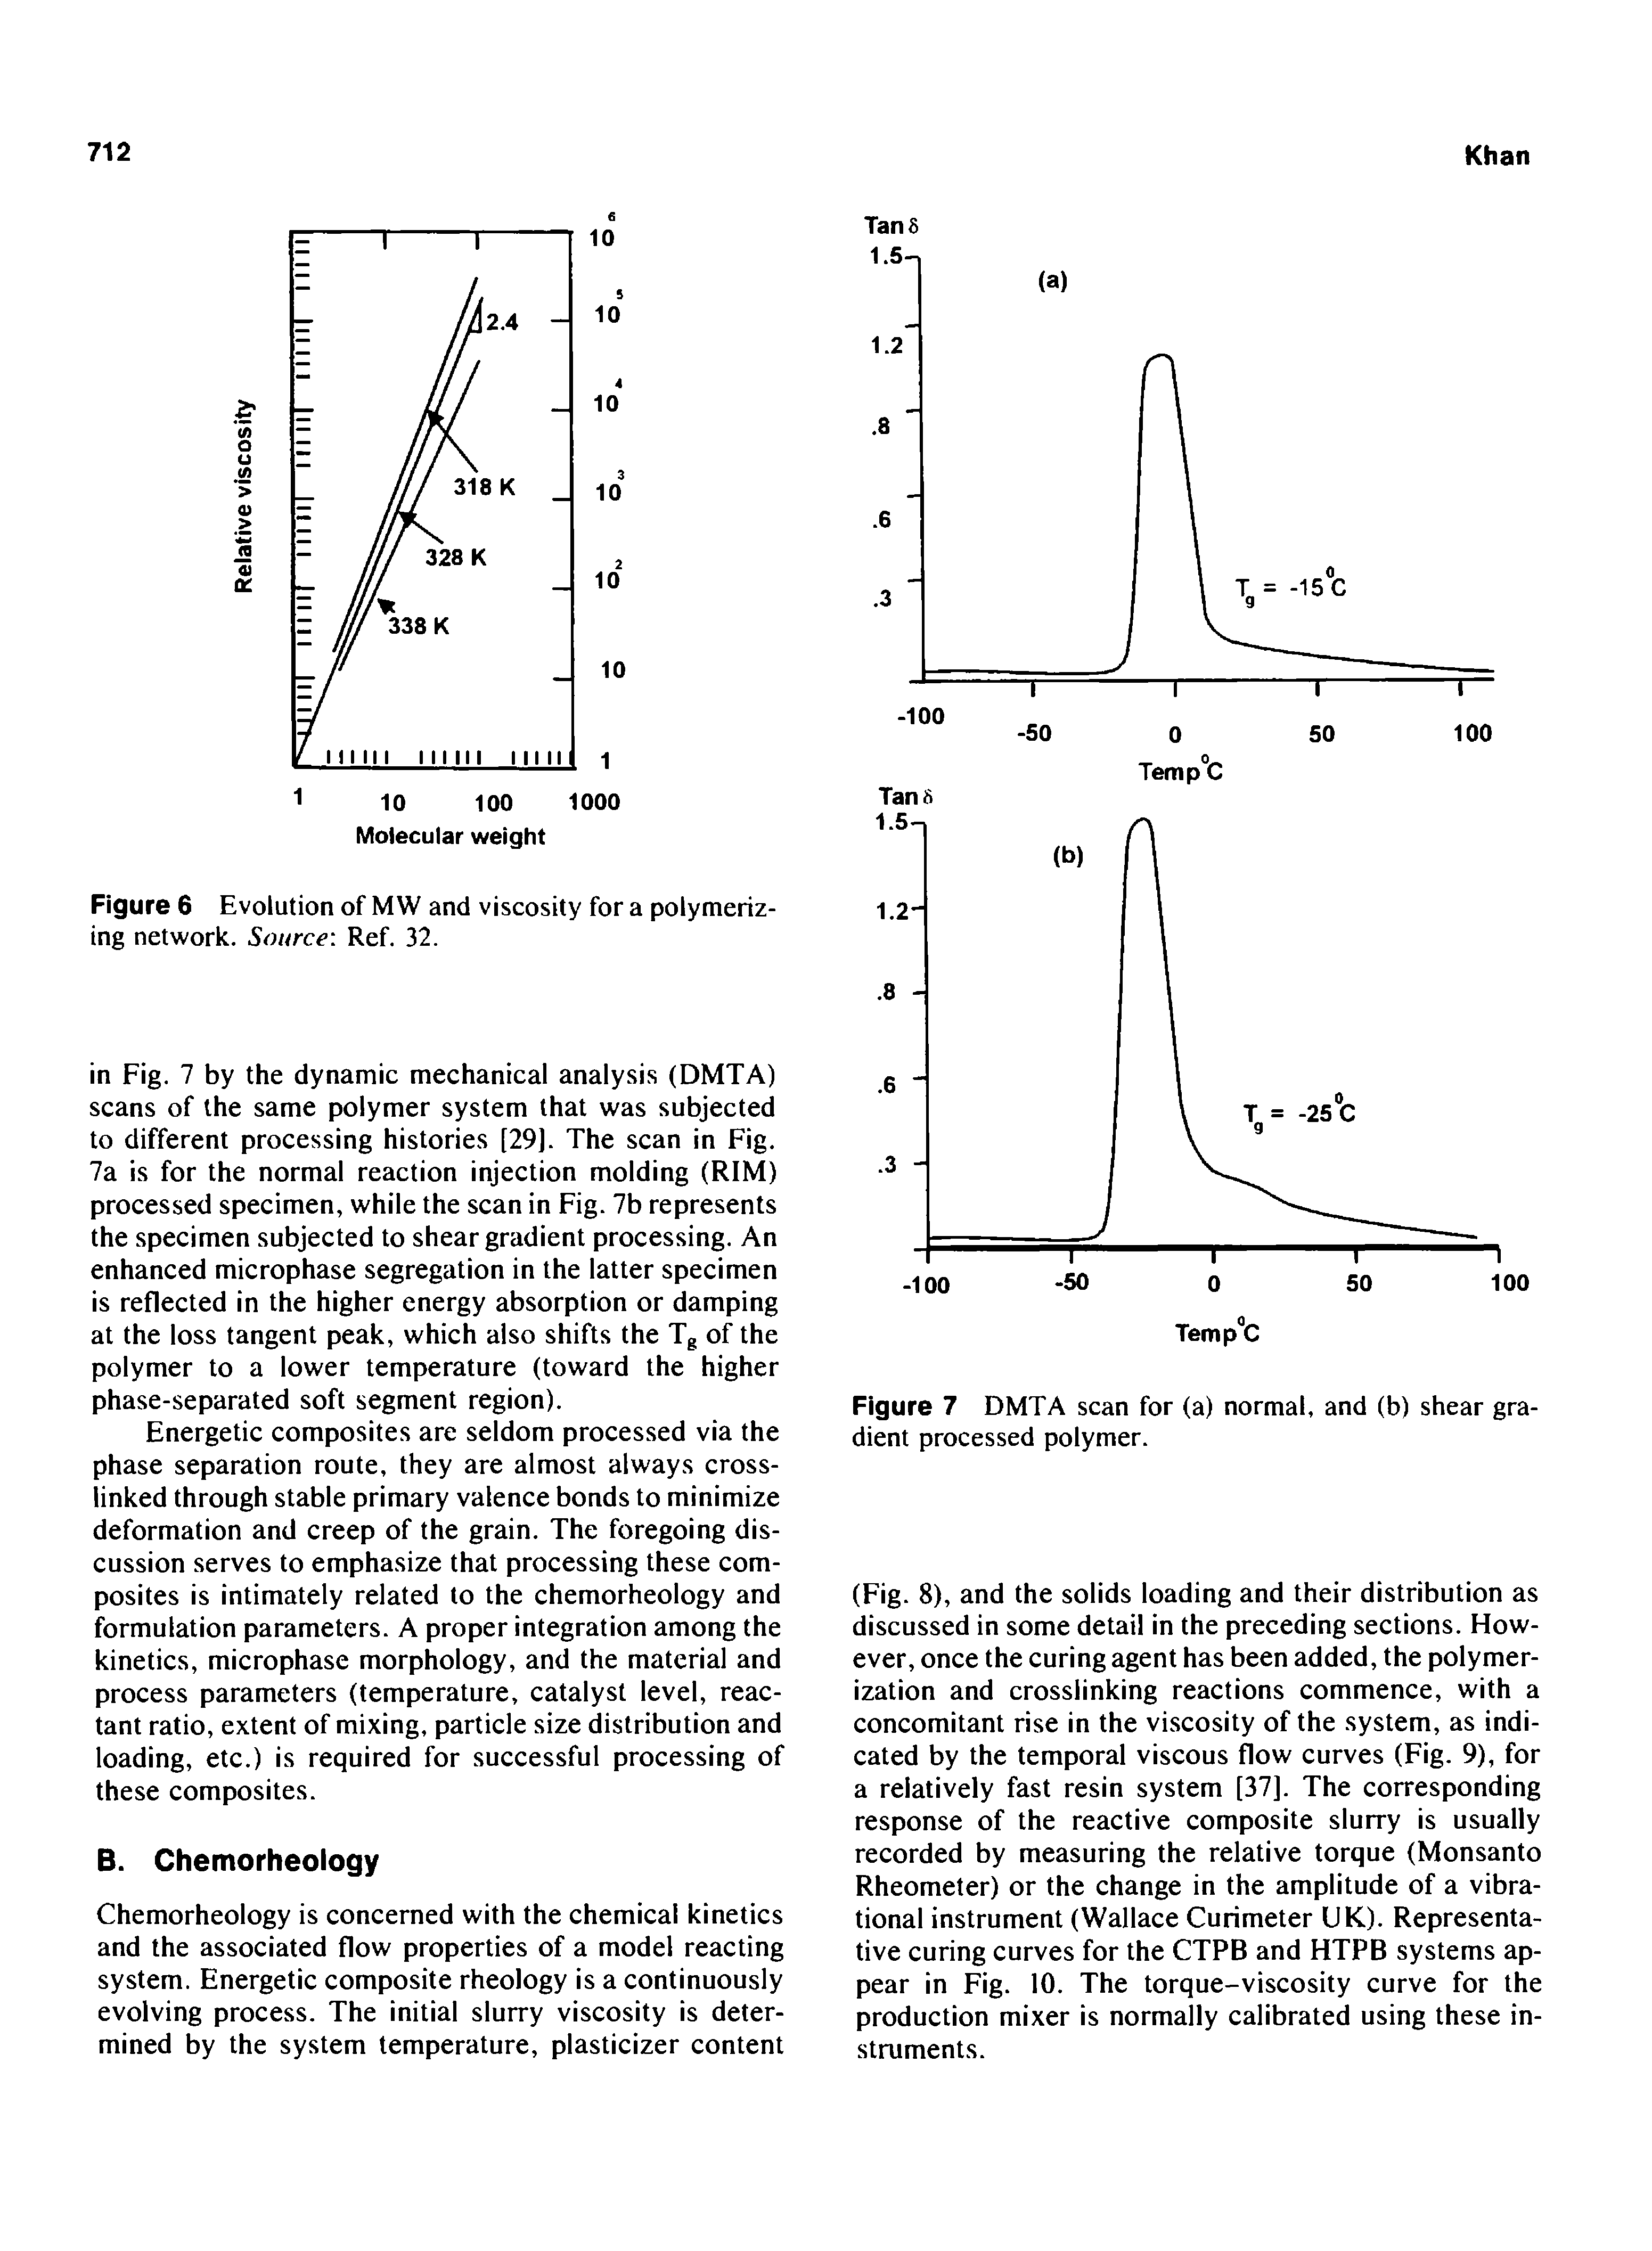 Figure 6 Evolution of MW and viscosity for a polymerizing network. Source Ref. 32.